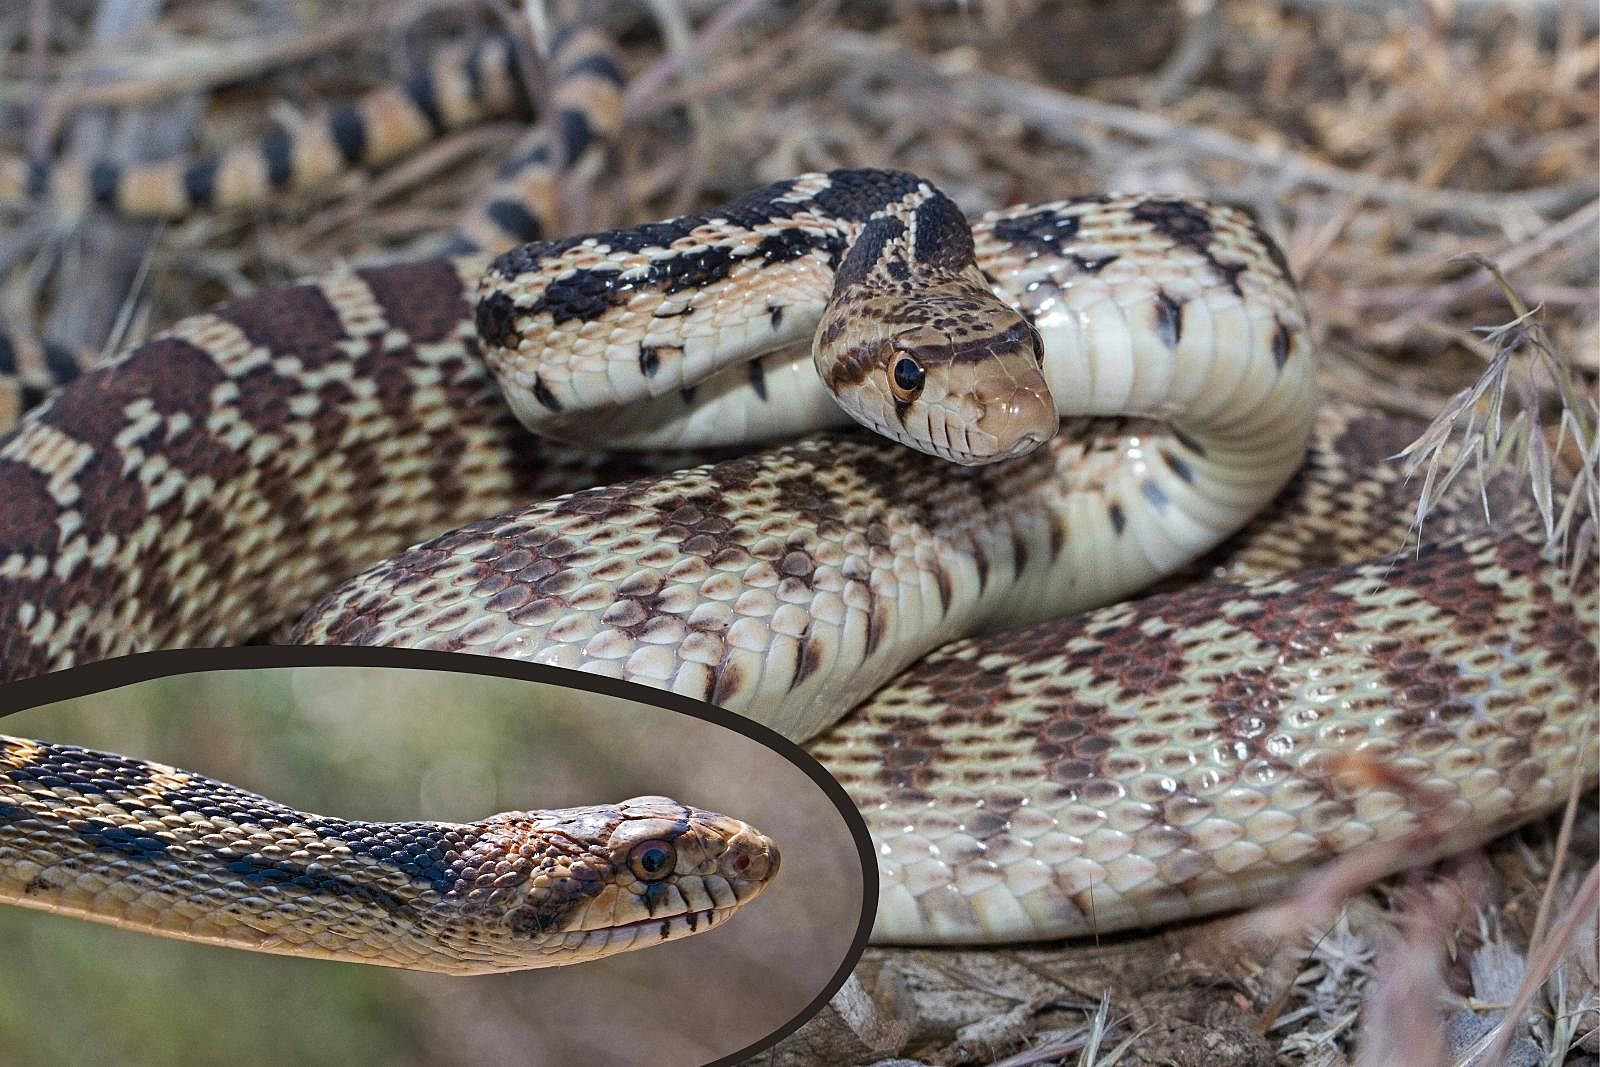 A coiled Great Basin Gopher Snake; an inset shows one's head.